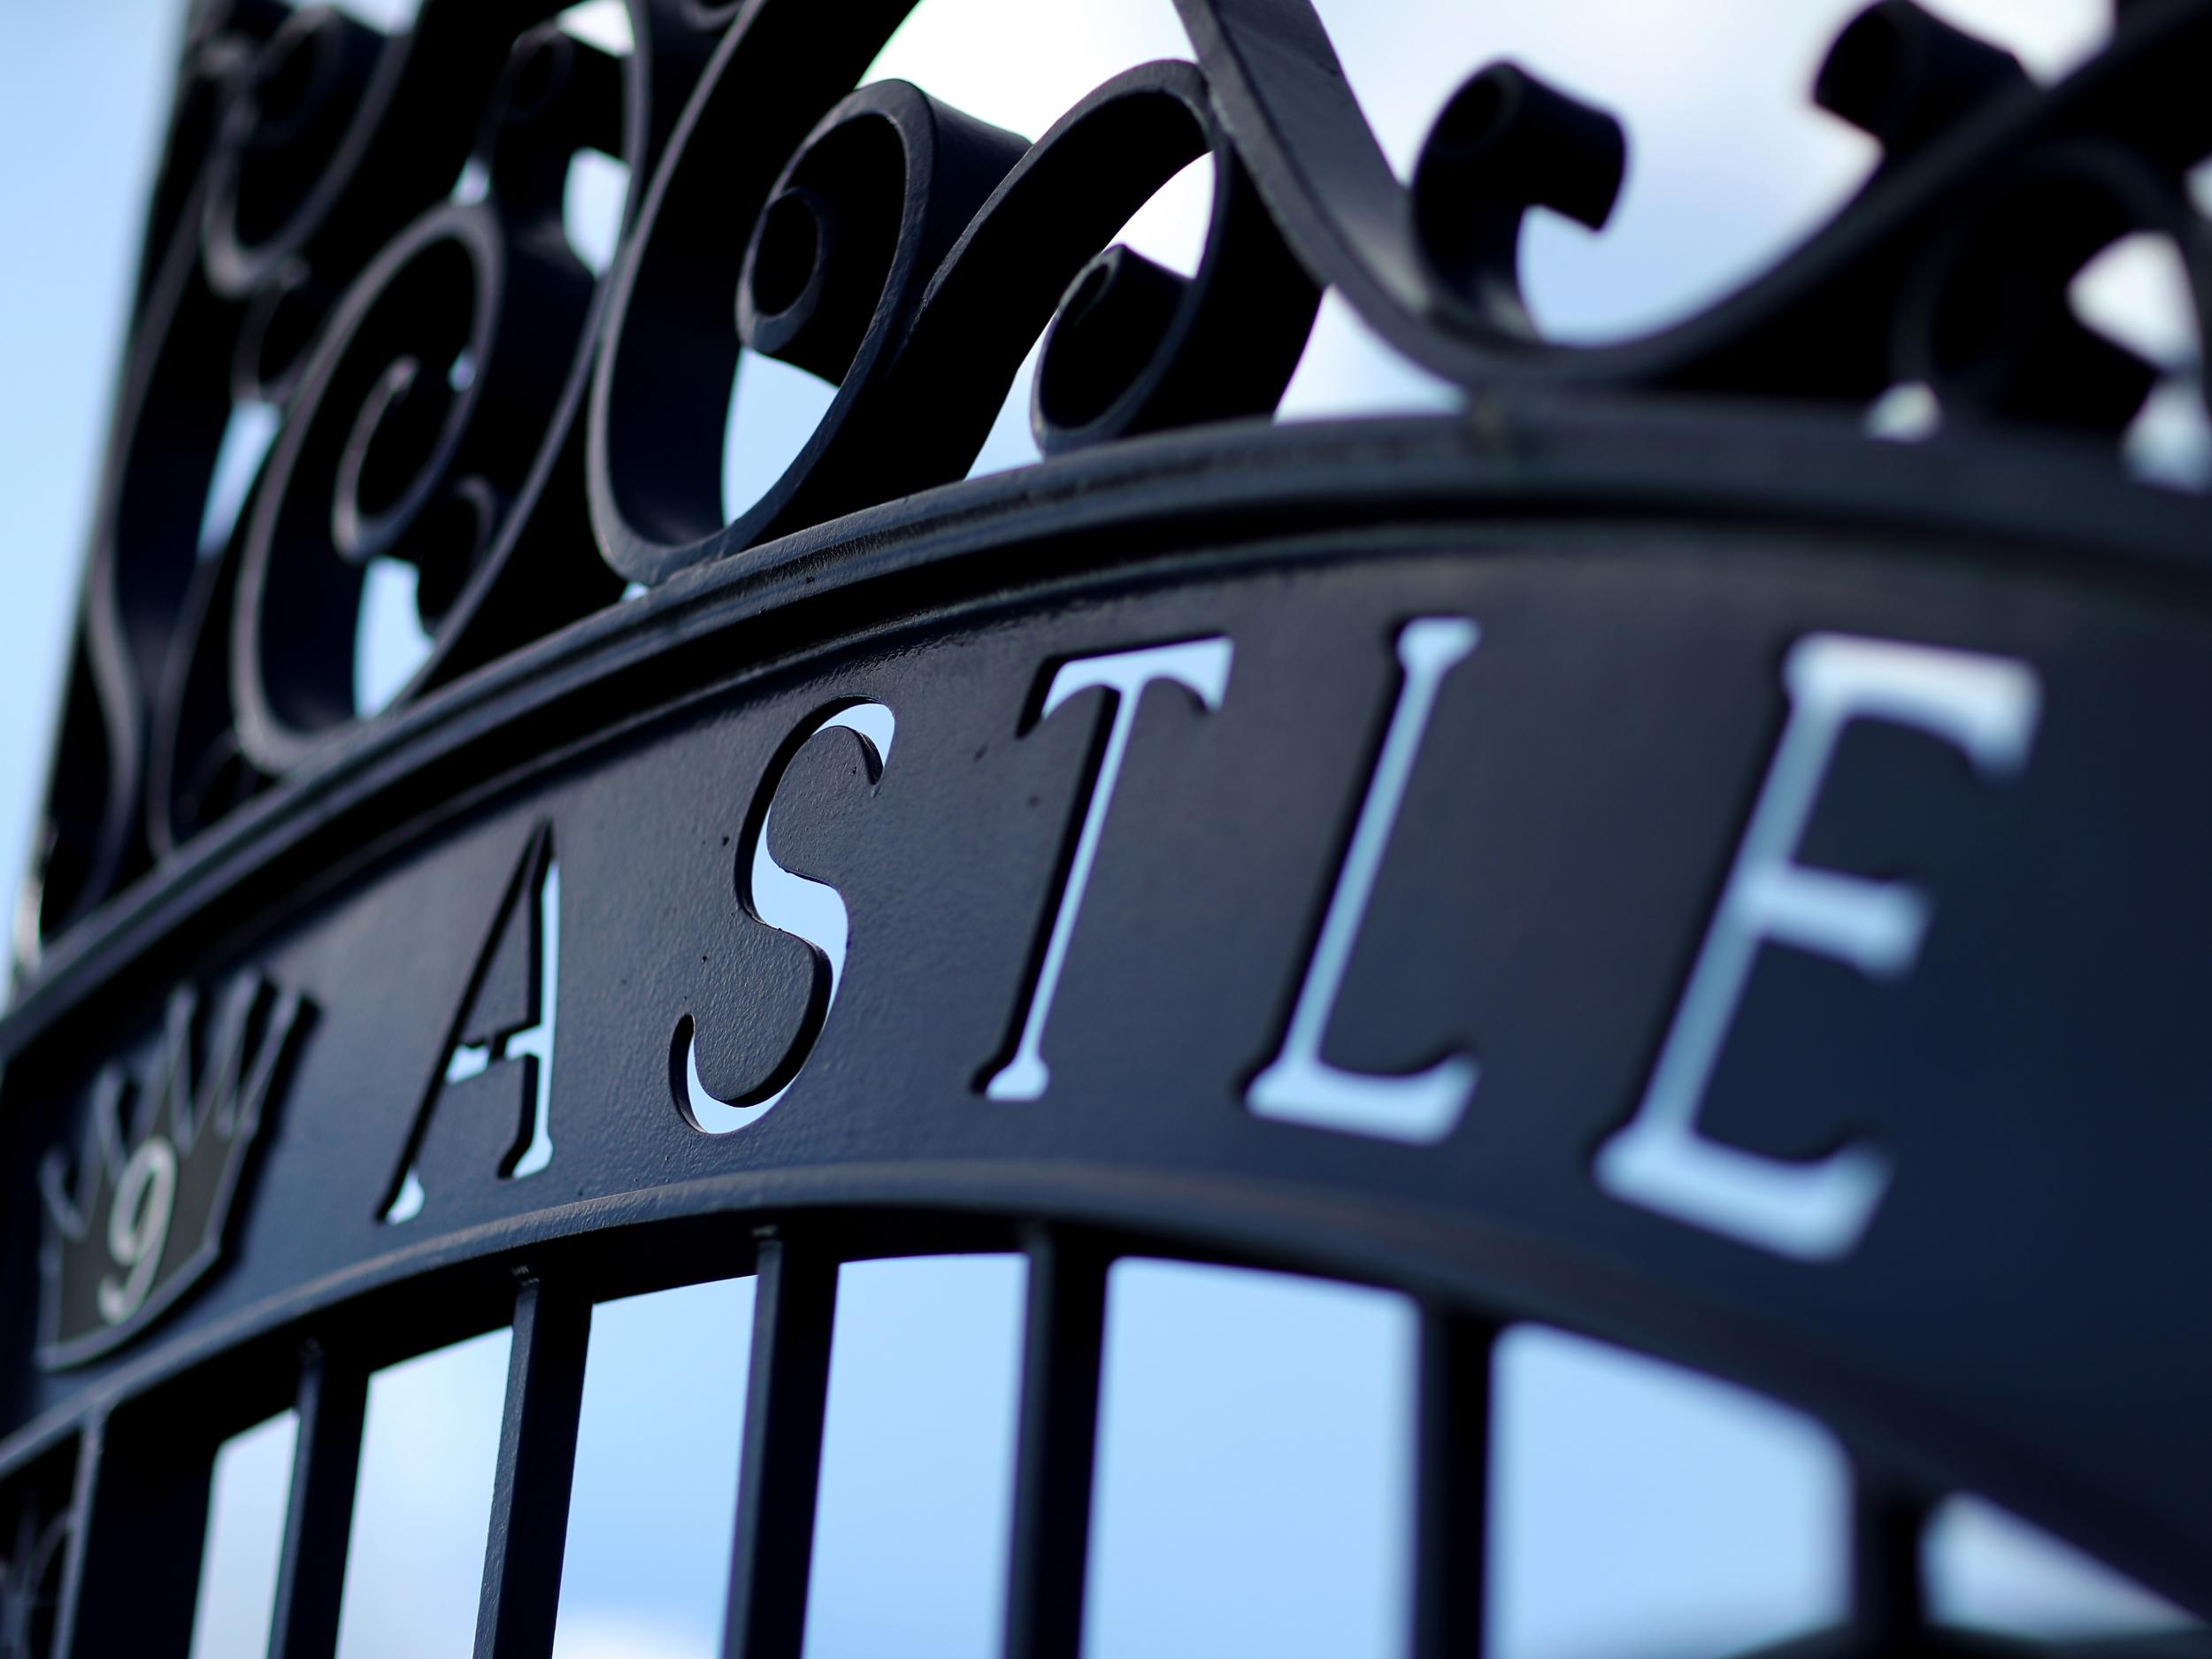 Gates outside West Brom's ground commemorate the late Astle